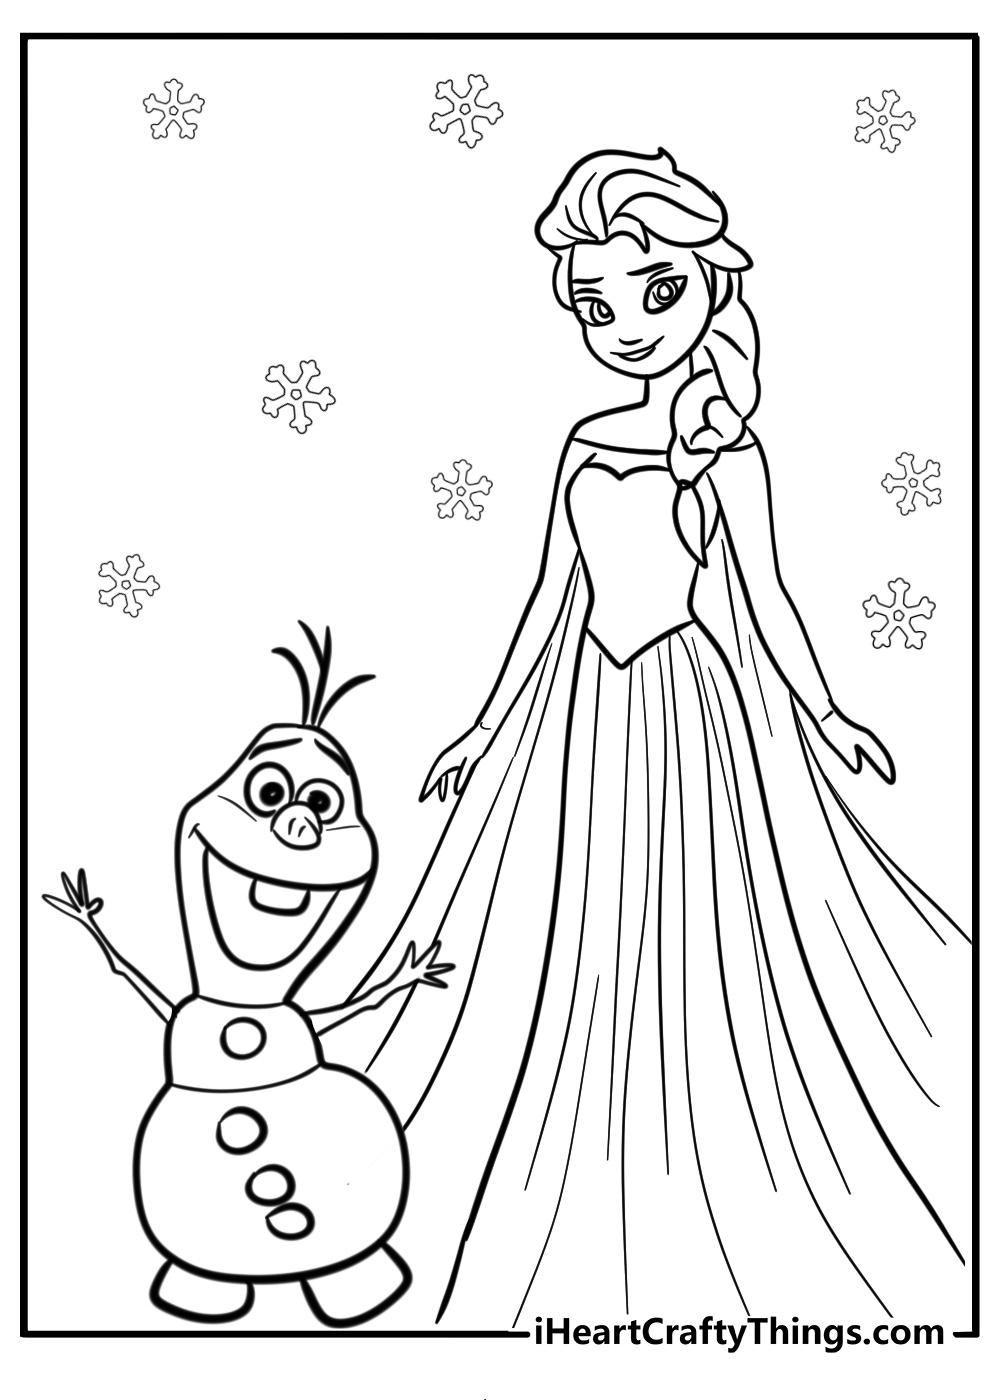 Elsa and olaf coloring page